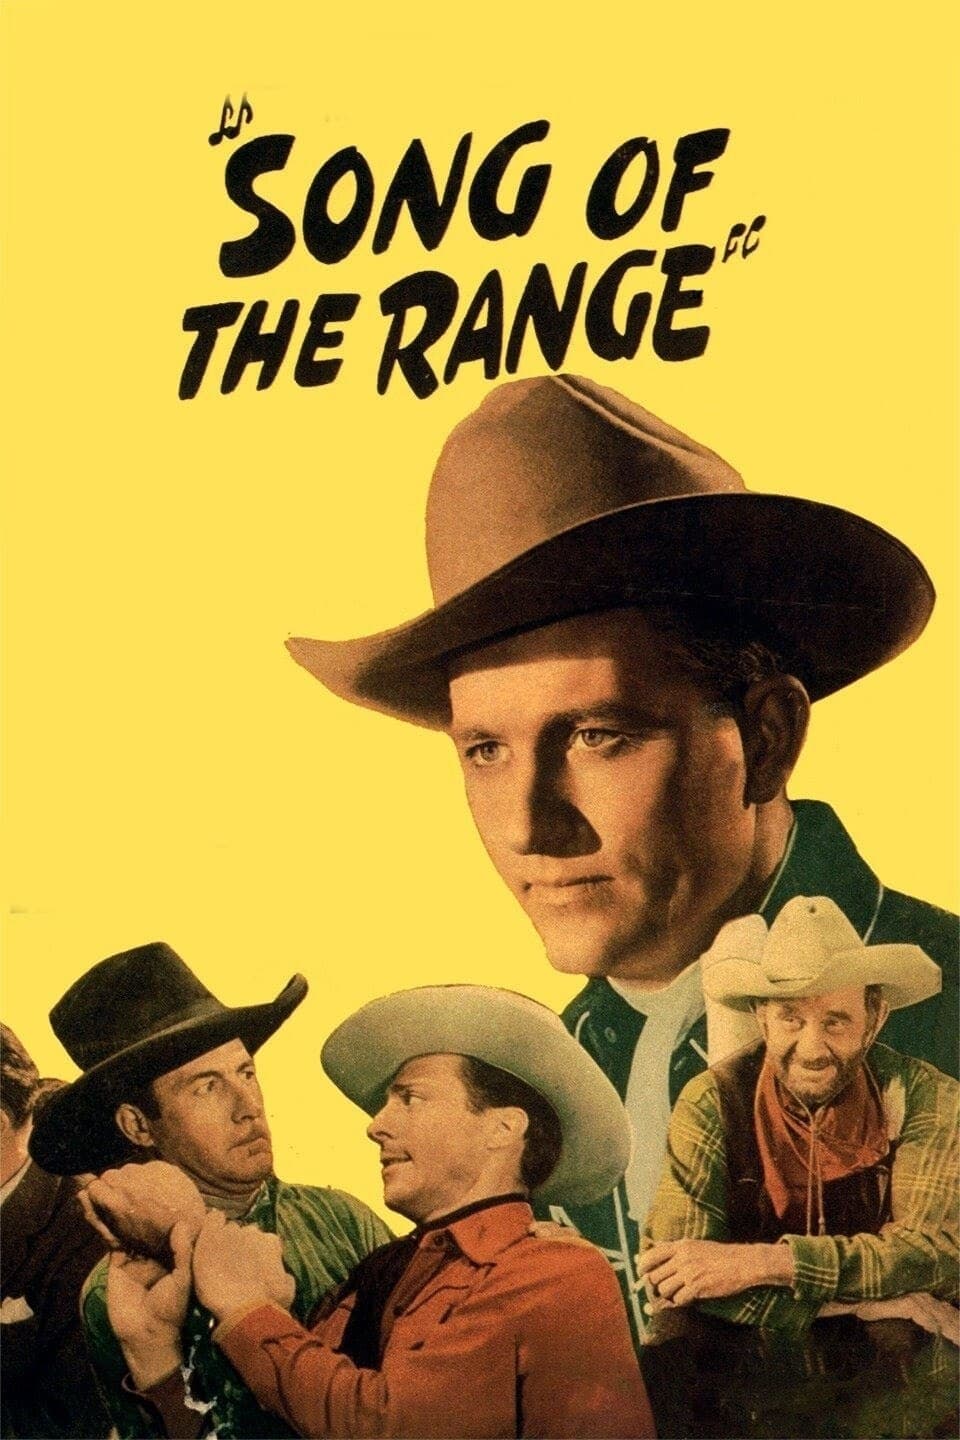 Song of the Range (1944)